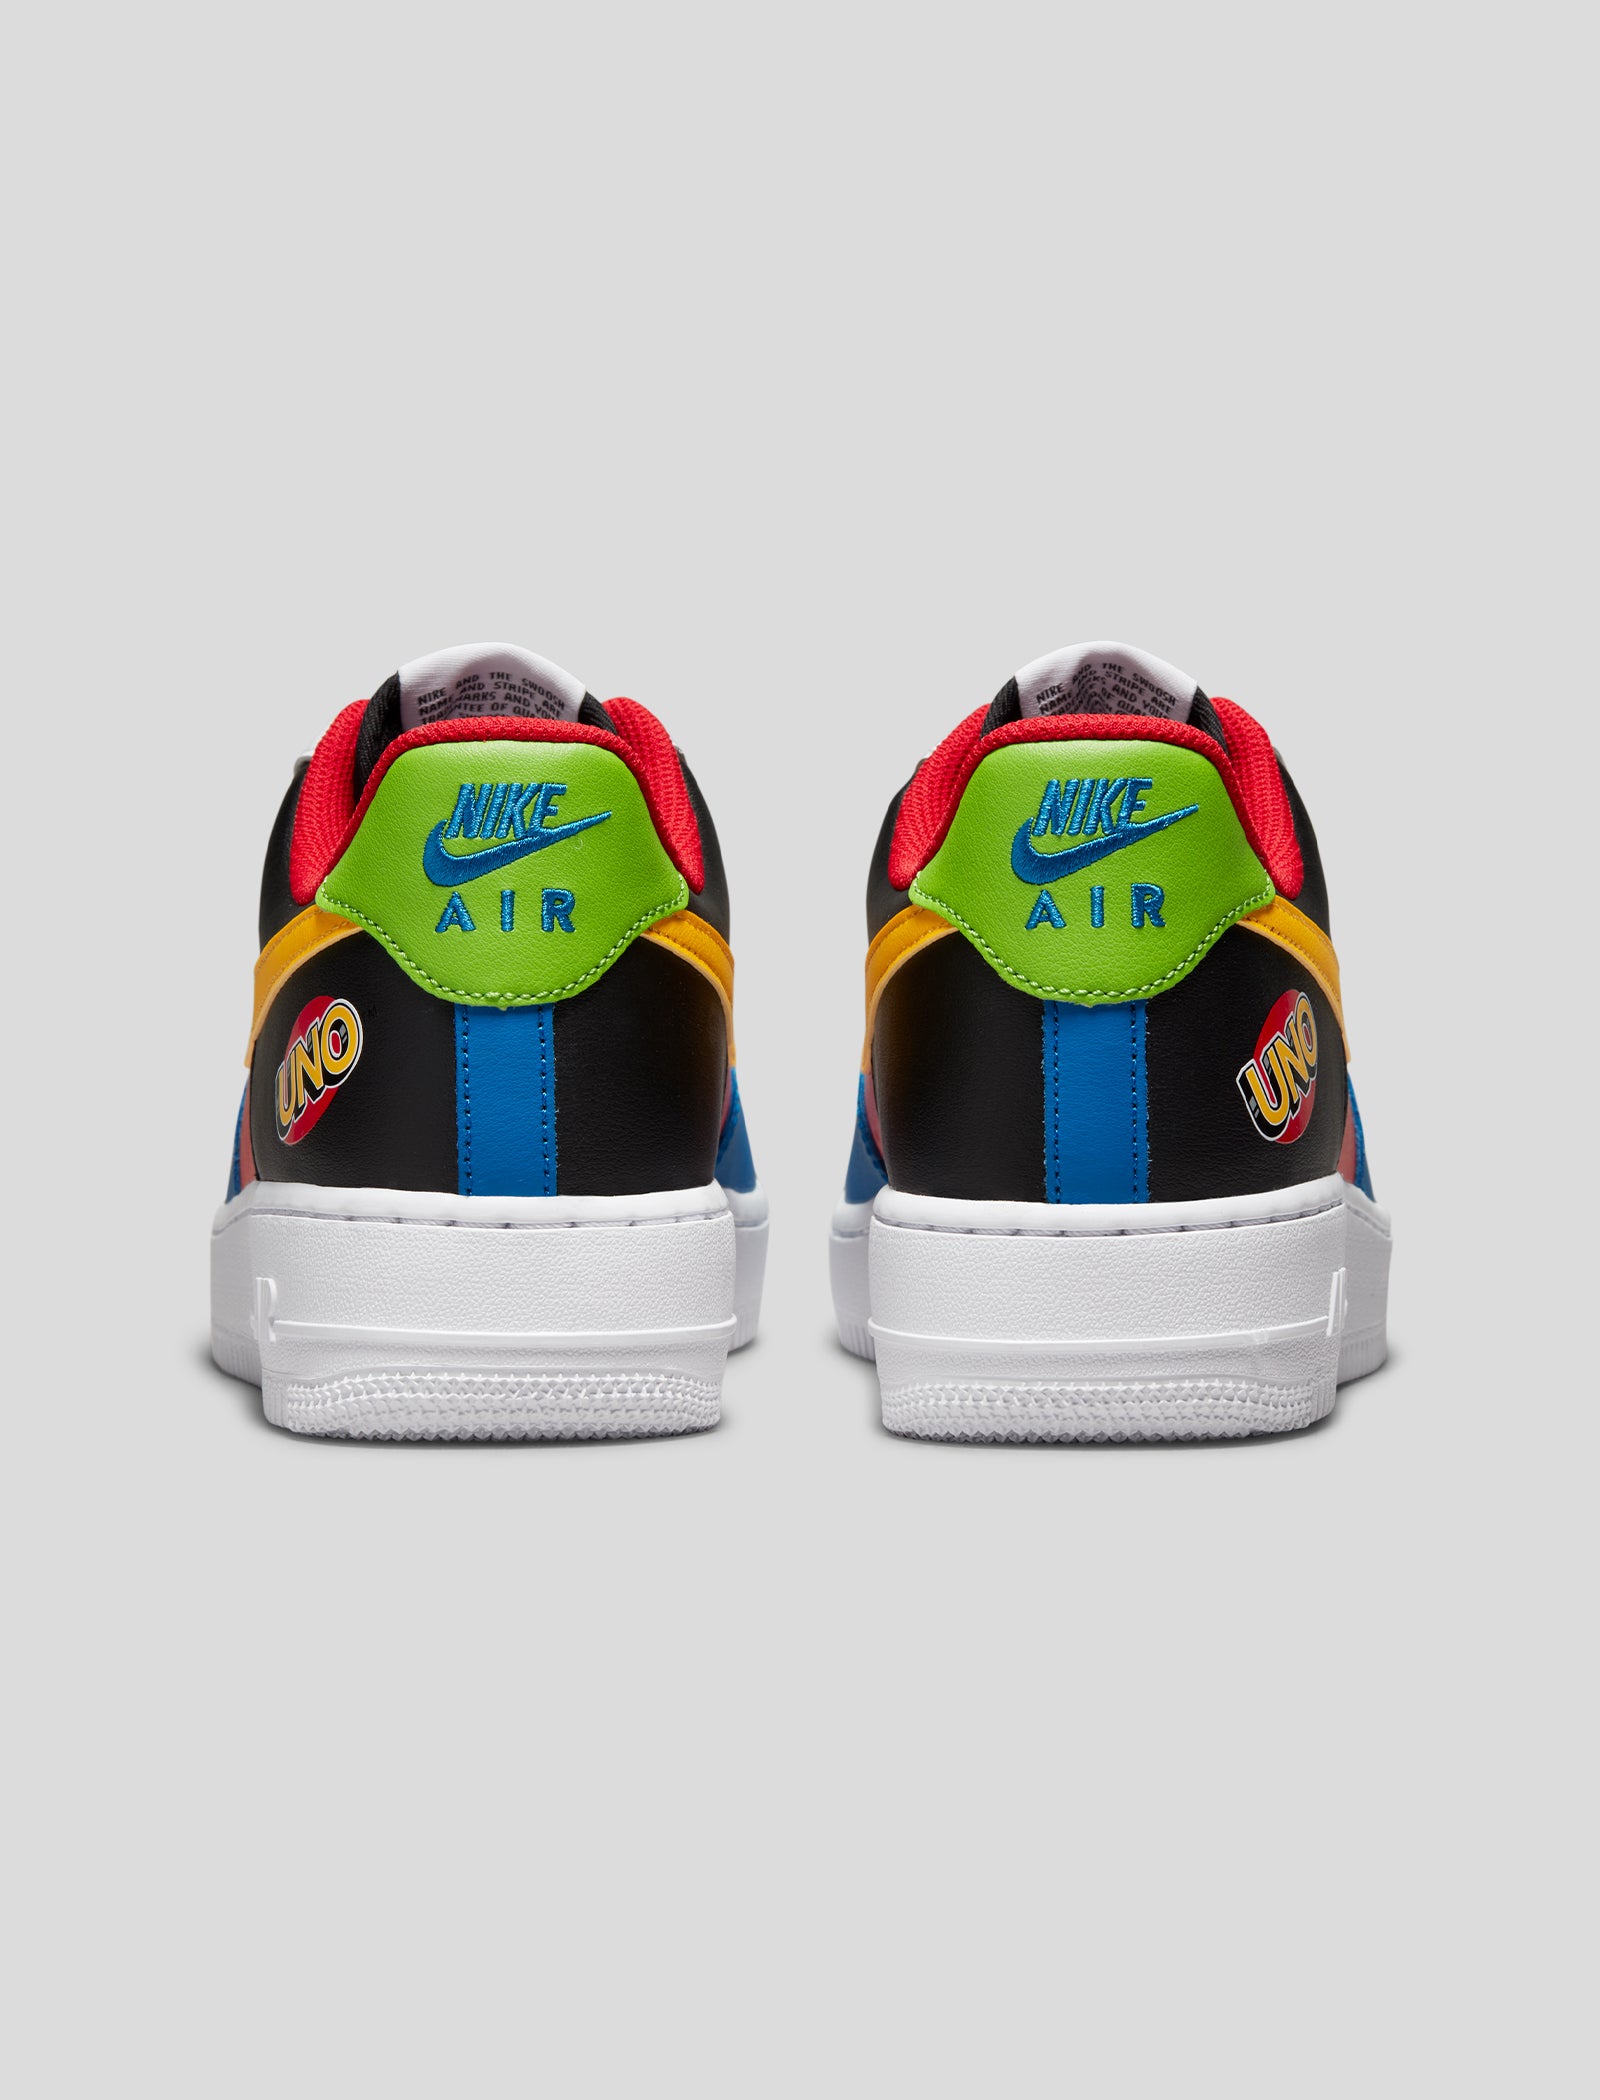 AIR FORCE 1 '07 "UNO"